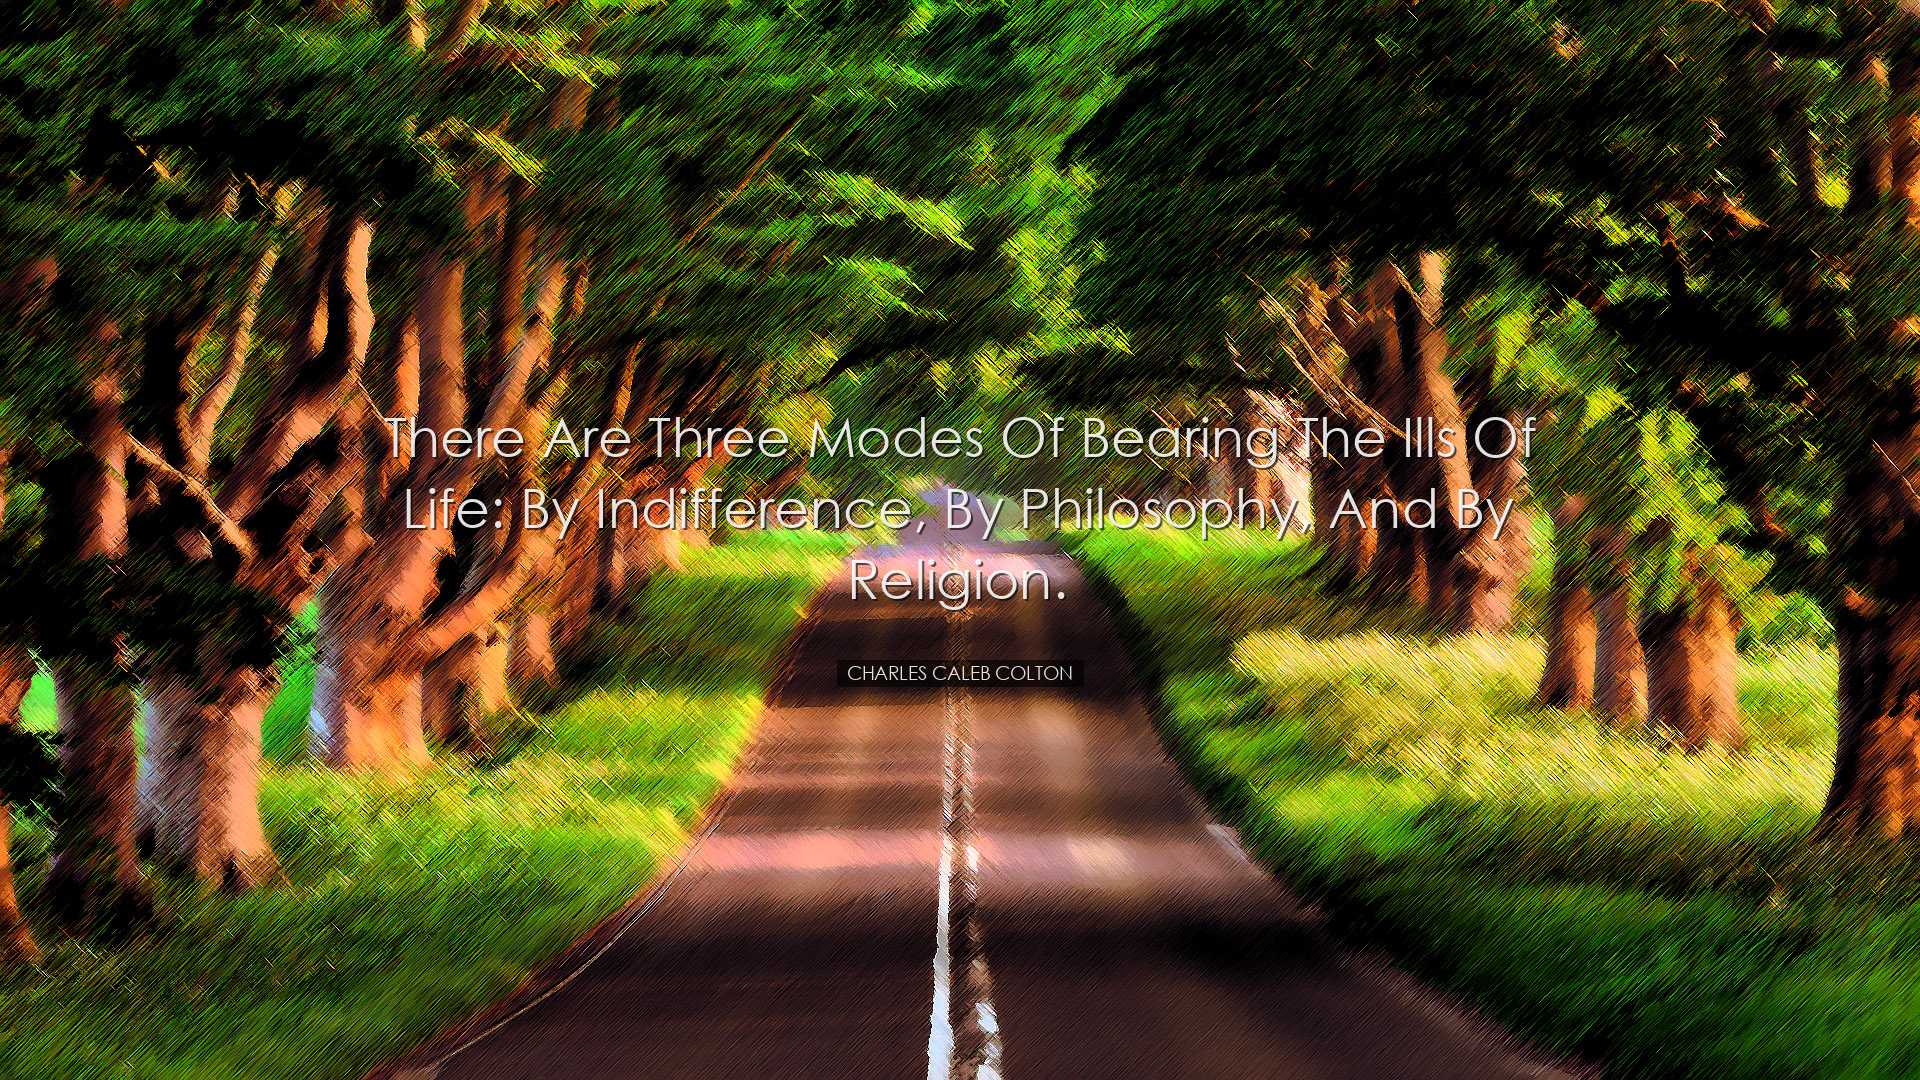 There are three modes of bearing the ills of life: by indifference